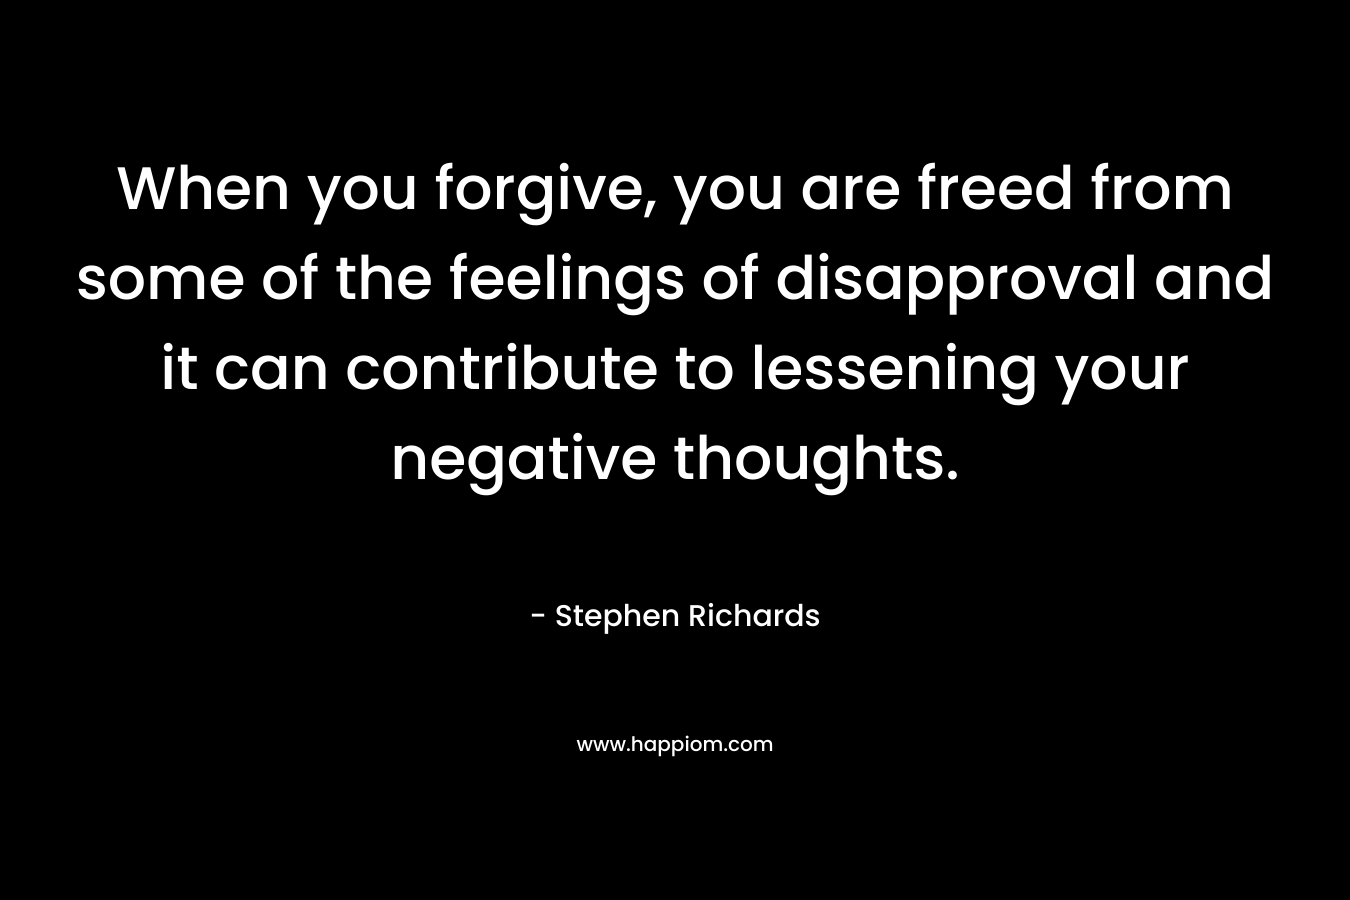 When you forgive, you are freed from some of the feelings of disapproval and it can contribute to lessening your negative thoughts.